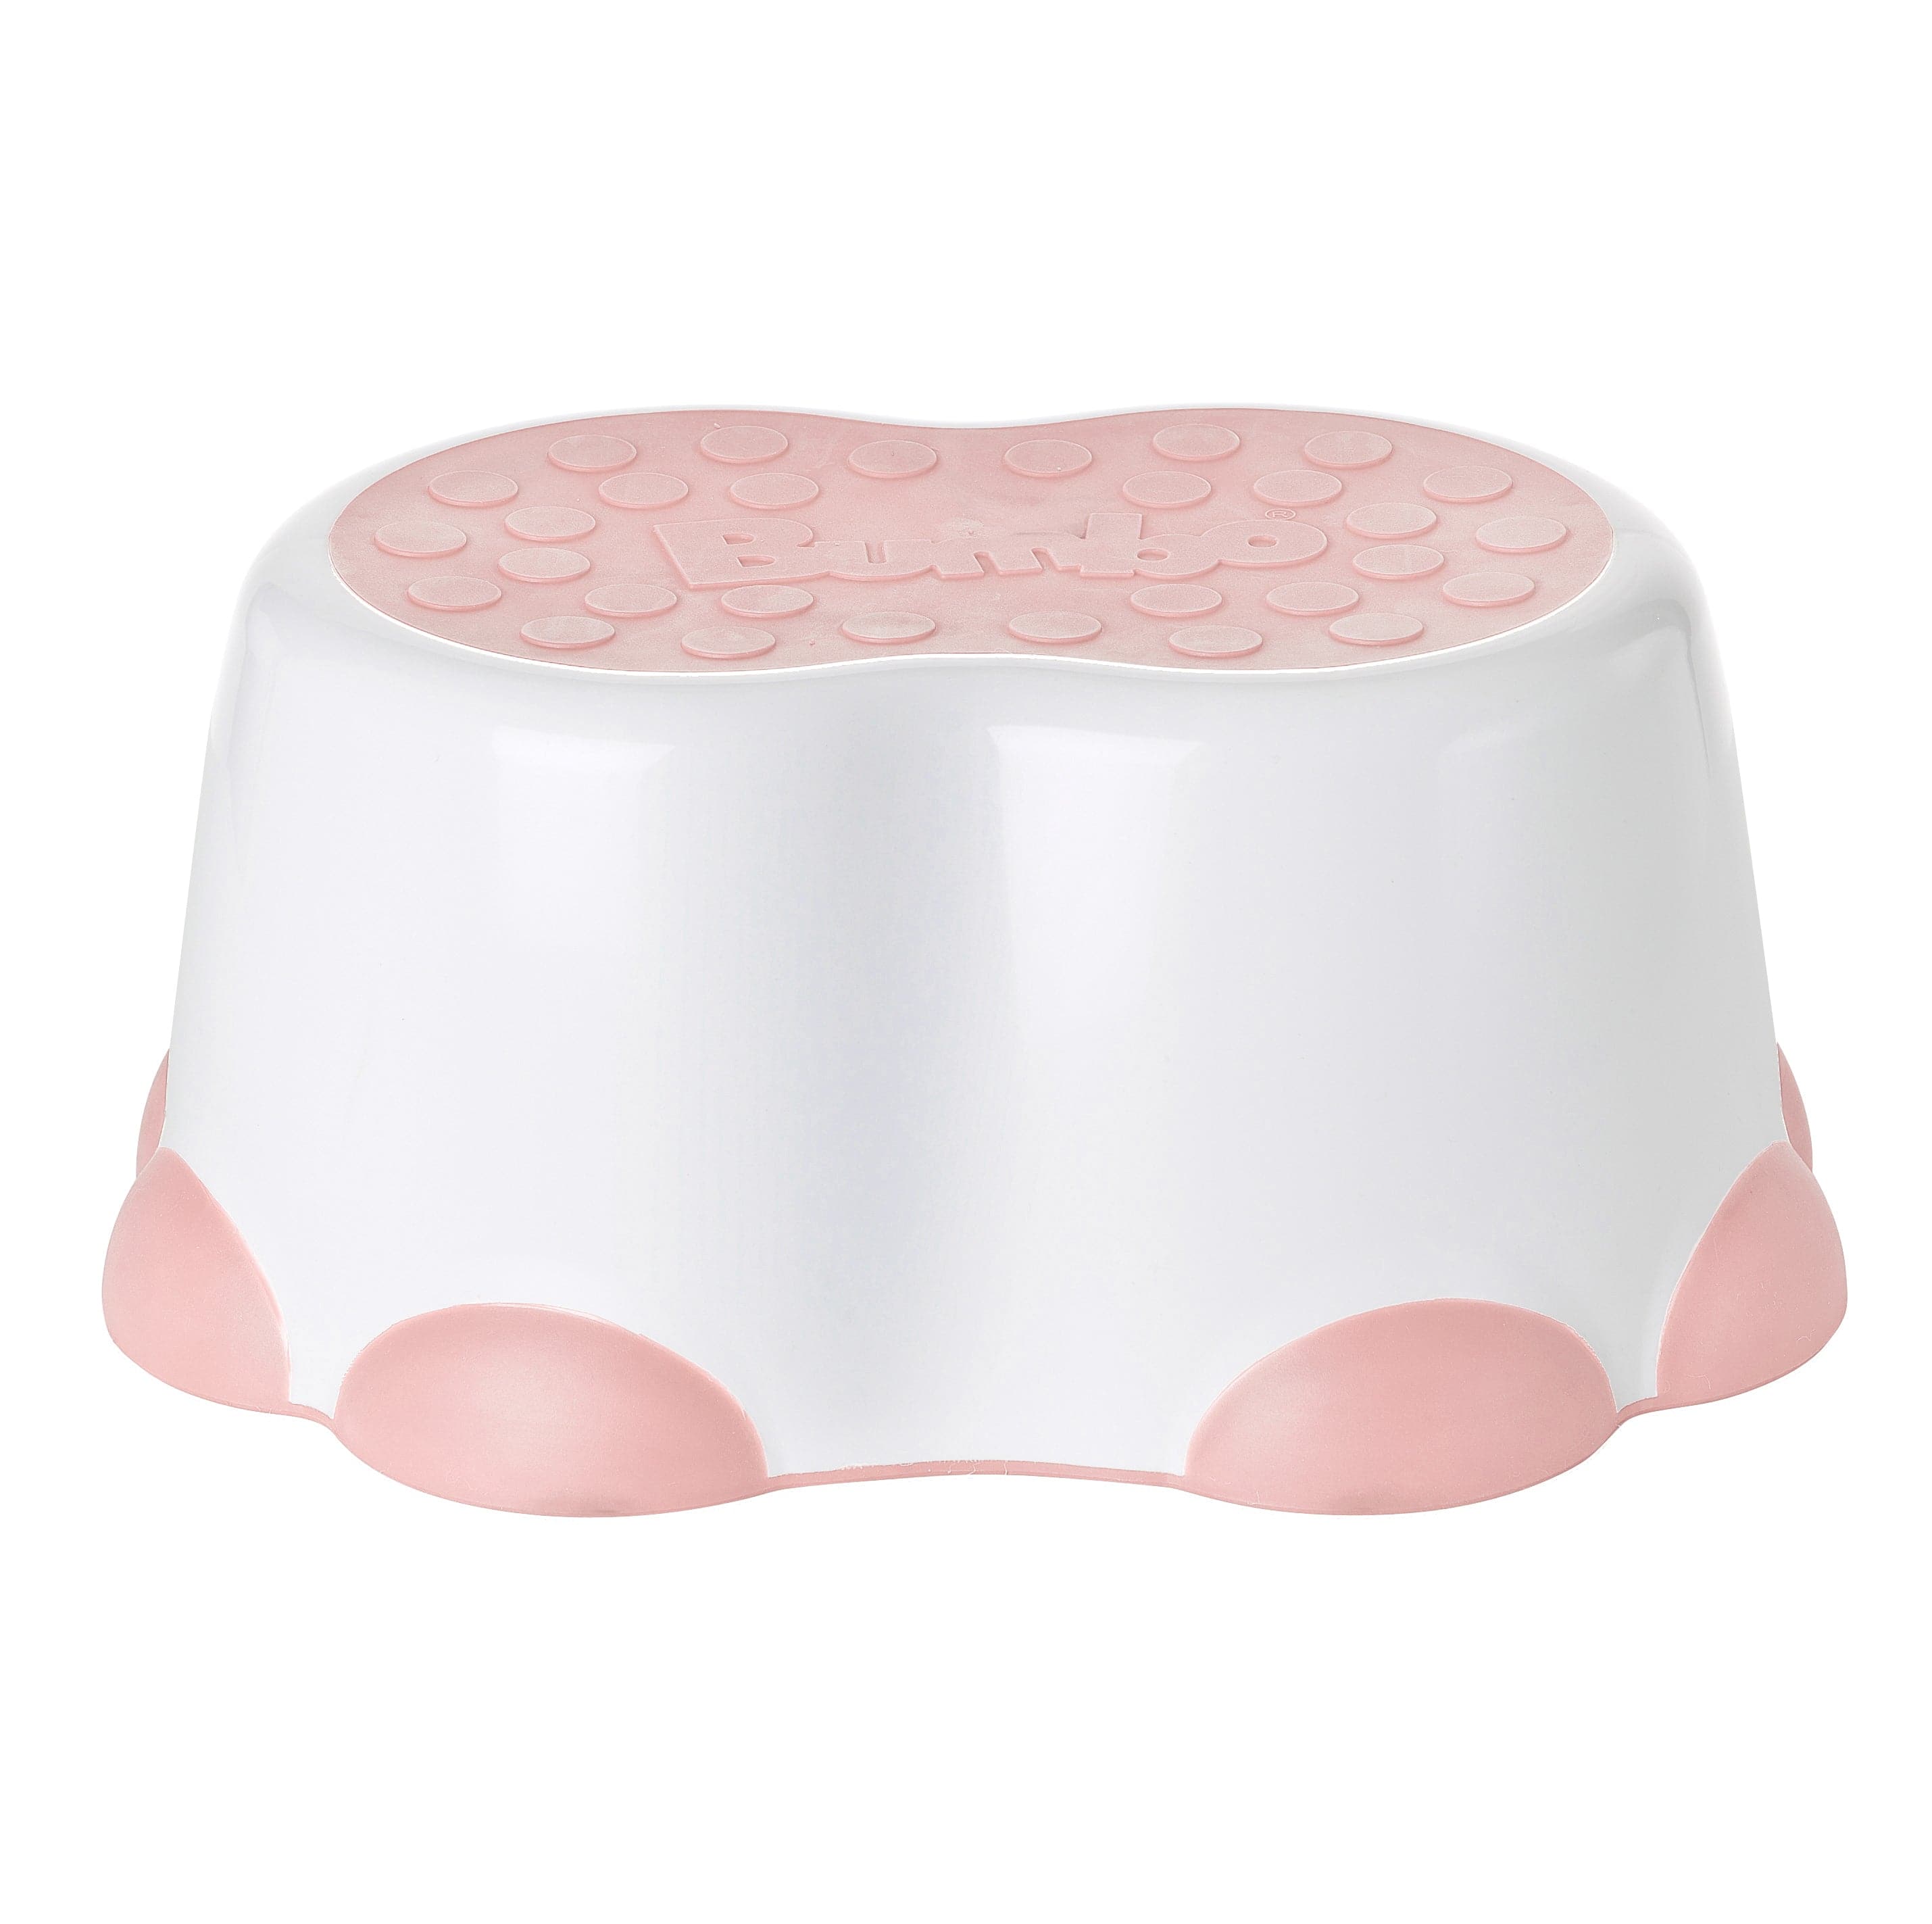 Bumbo Step Stool - Pink - For Your Little One